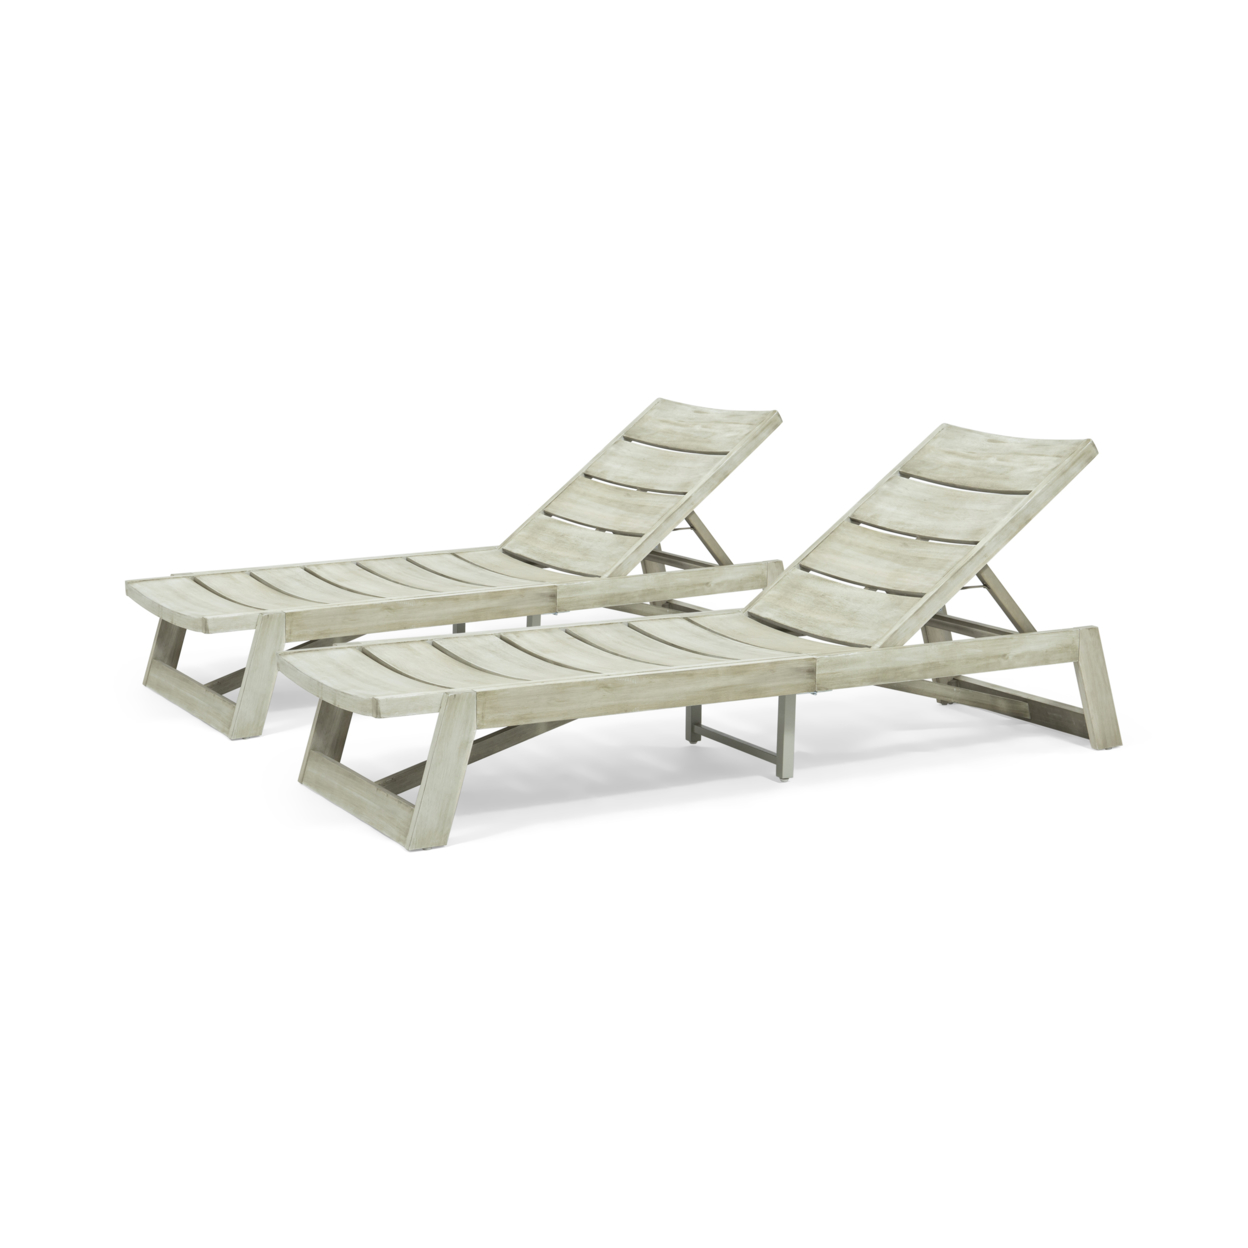 Angela Outdoor Wood And Iron Chaise Lounges (Set Of 2) - Light Gray Wash, Gray